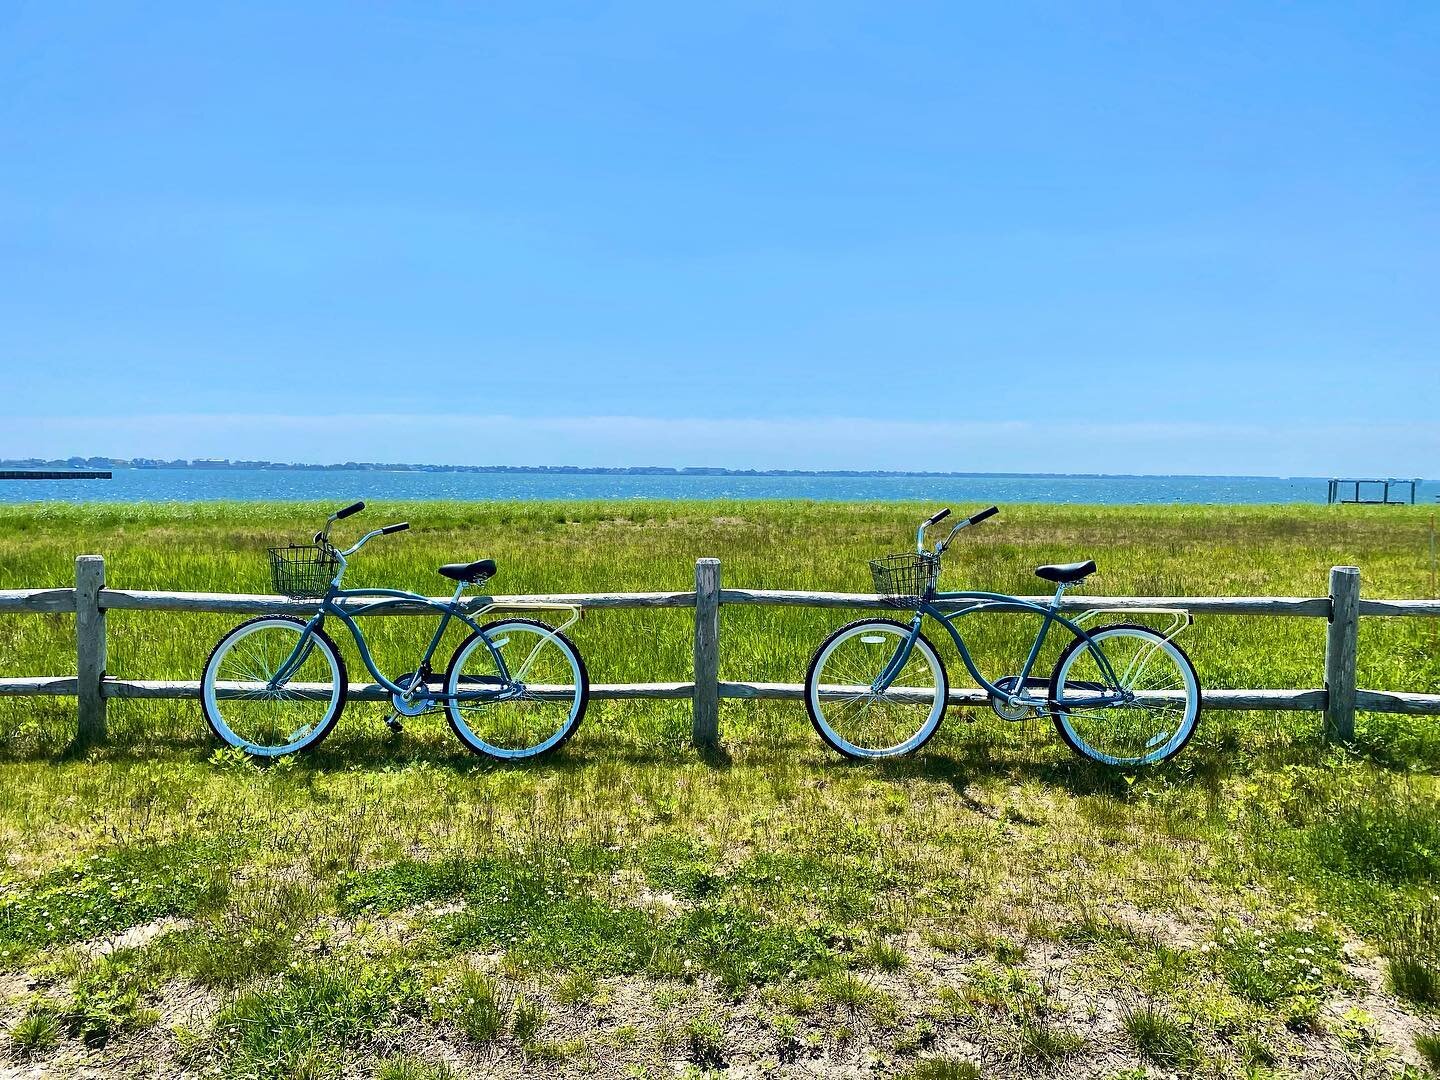 Our wheels are spinning thinking about all the fun that will be summer of &lsquo;21! 

#localspokes#bikerentals#bikedelivery#westhampton #westhamptonbeach#beachcruiser